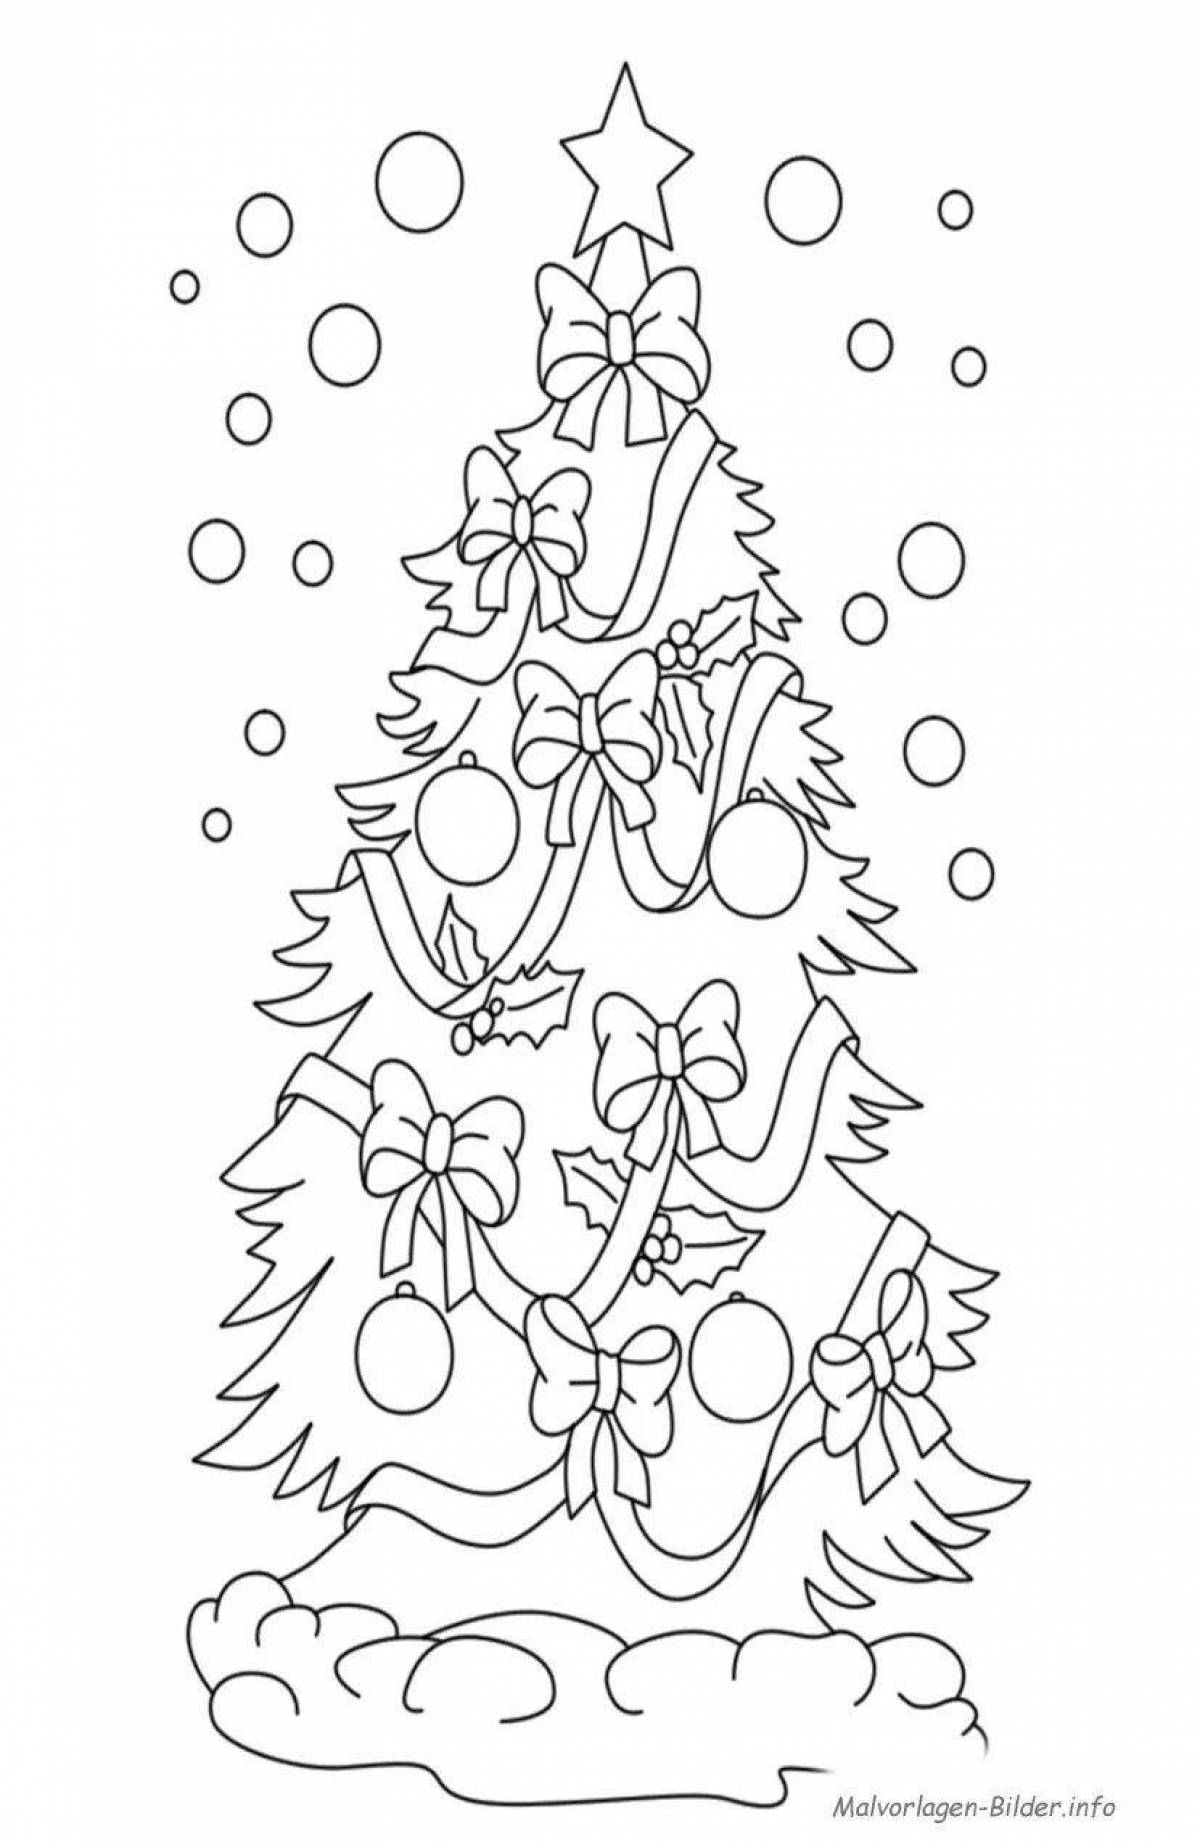 Gorgeous Christmas tree coloring book for 6-7 year olds